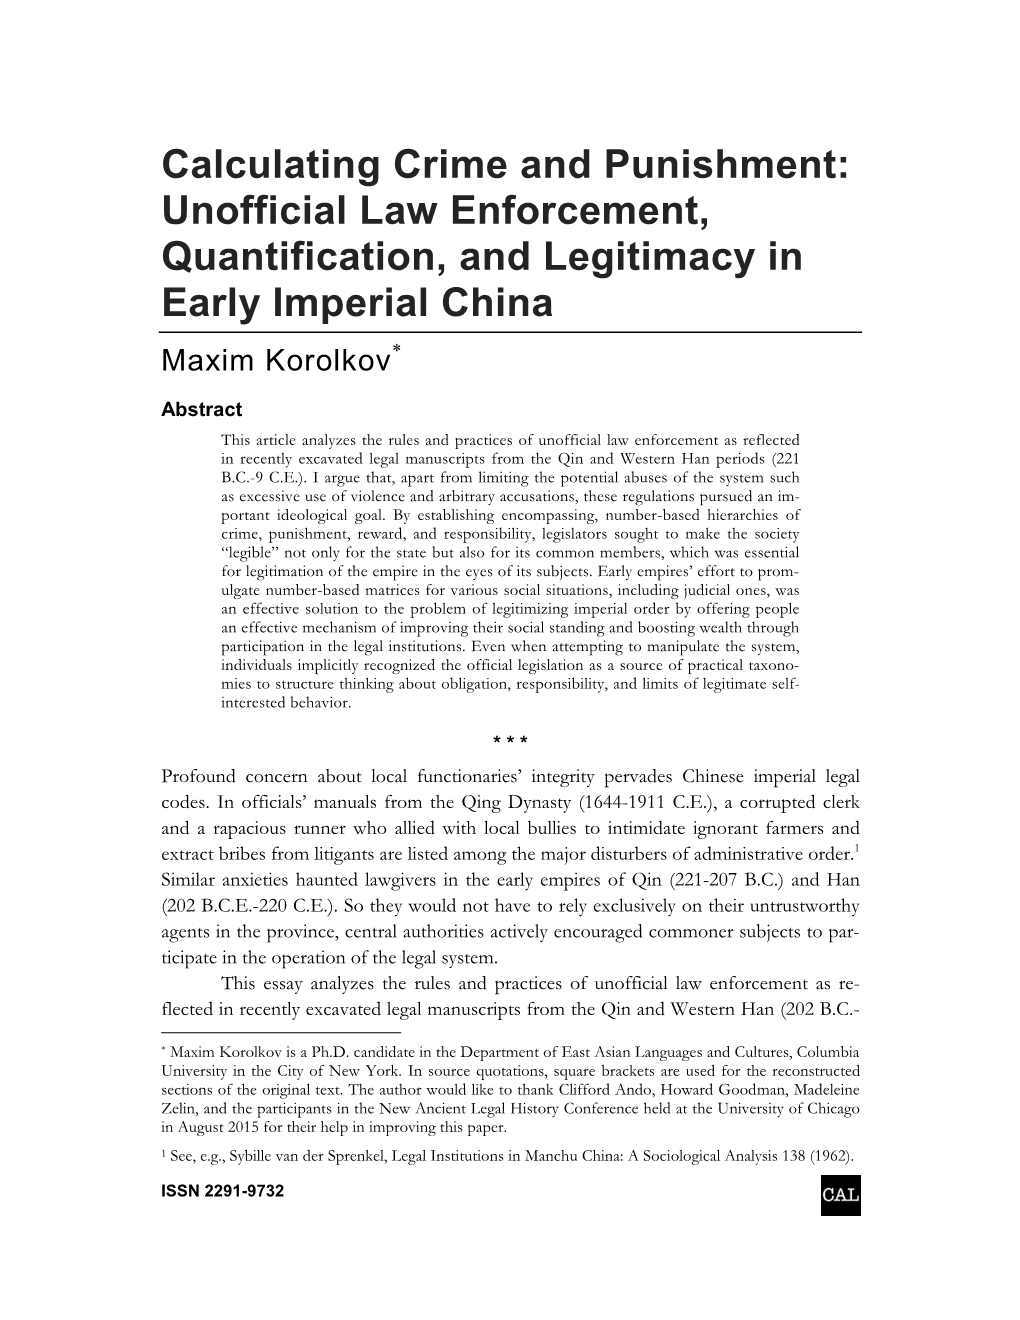 Calculating Crime and Punishment: Unofficial Law Enforcement, Quantification, and Legitimacy in Early Imperial China Maxim Korolkov*